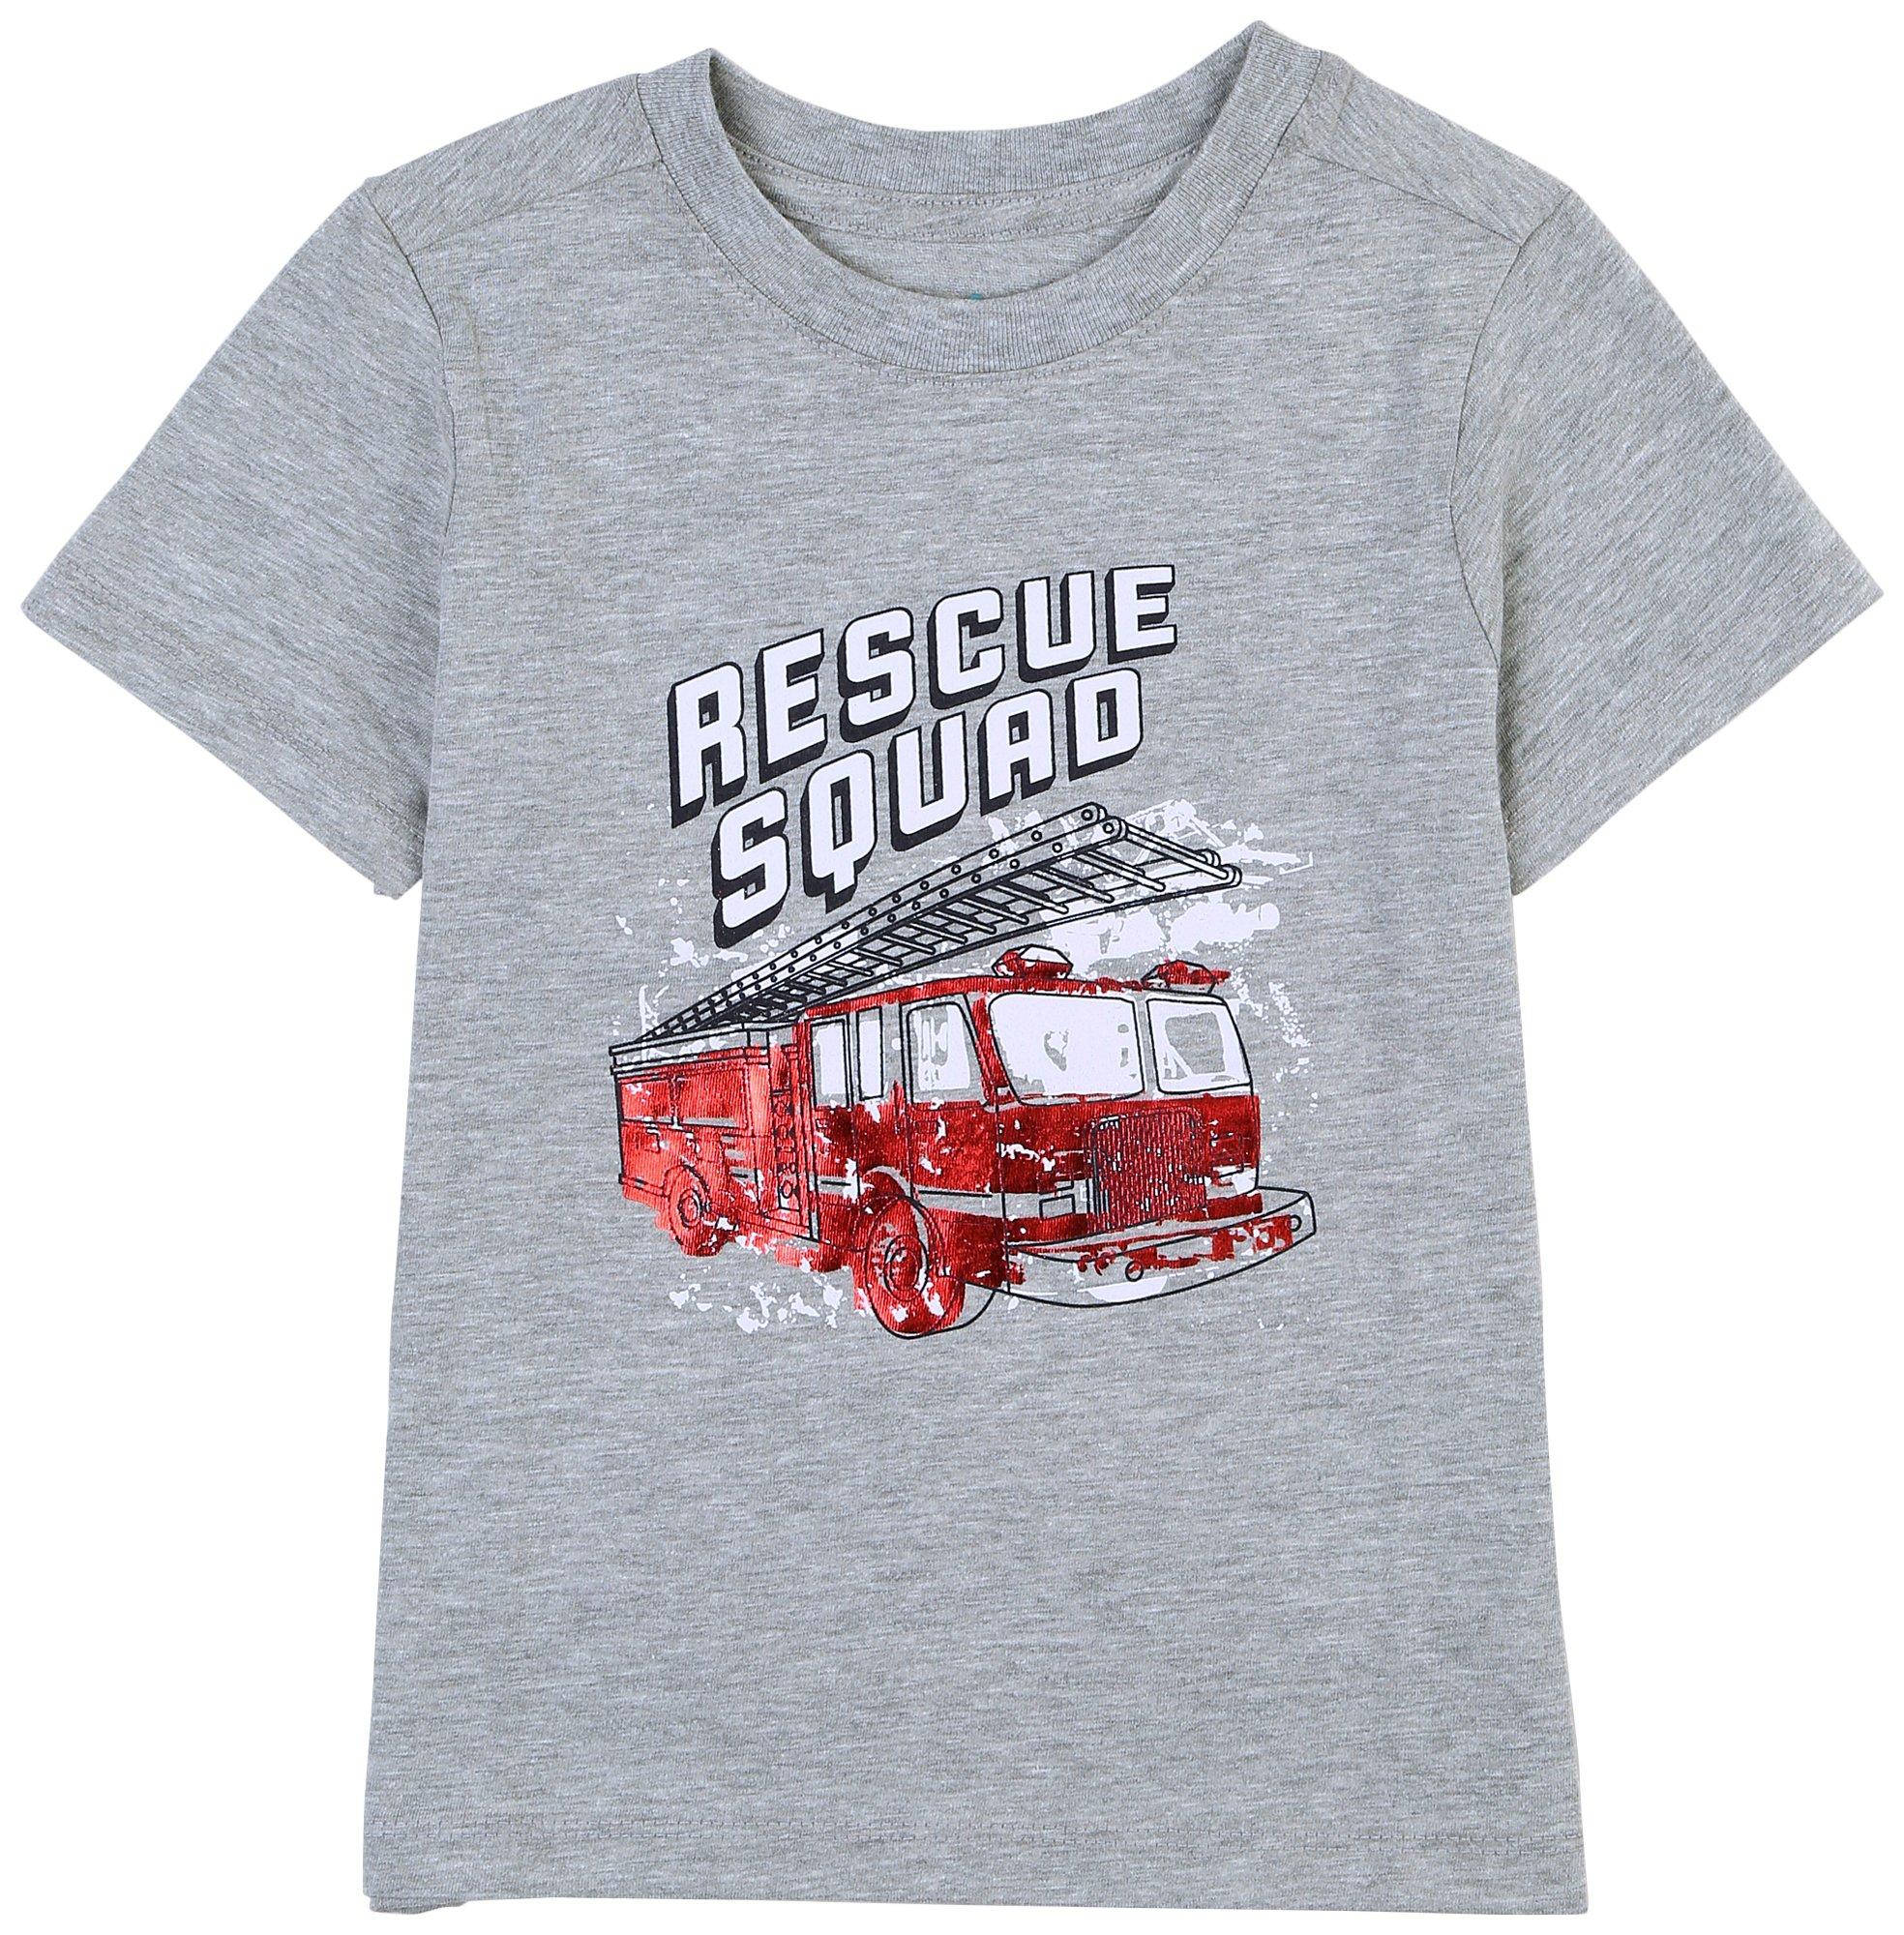 Toddler Boys Rescue Squad Short Sleeve Tee